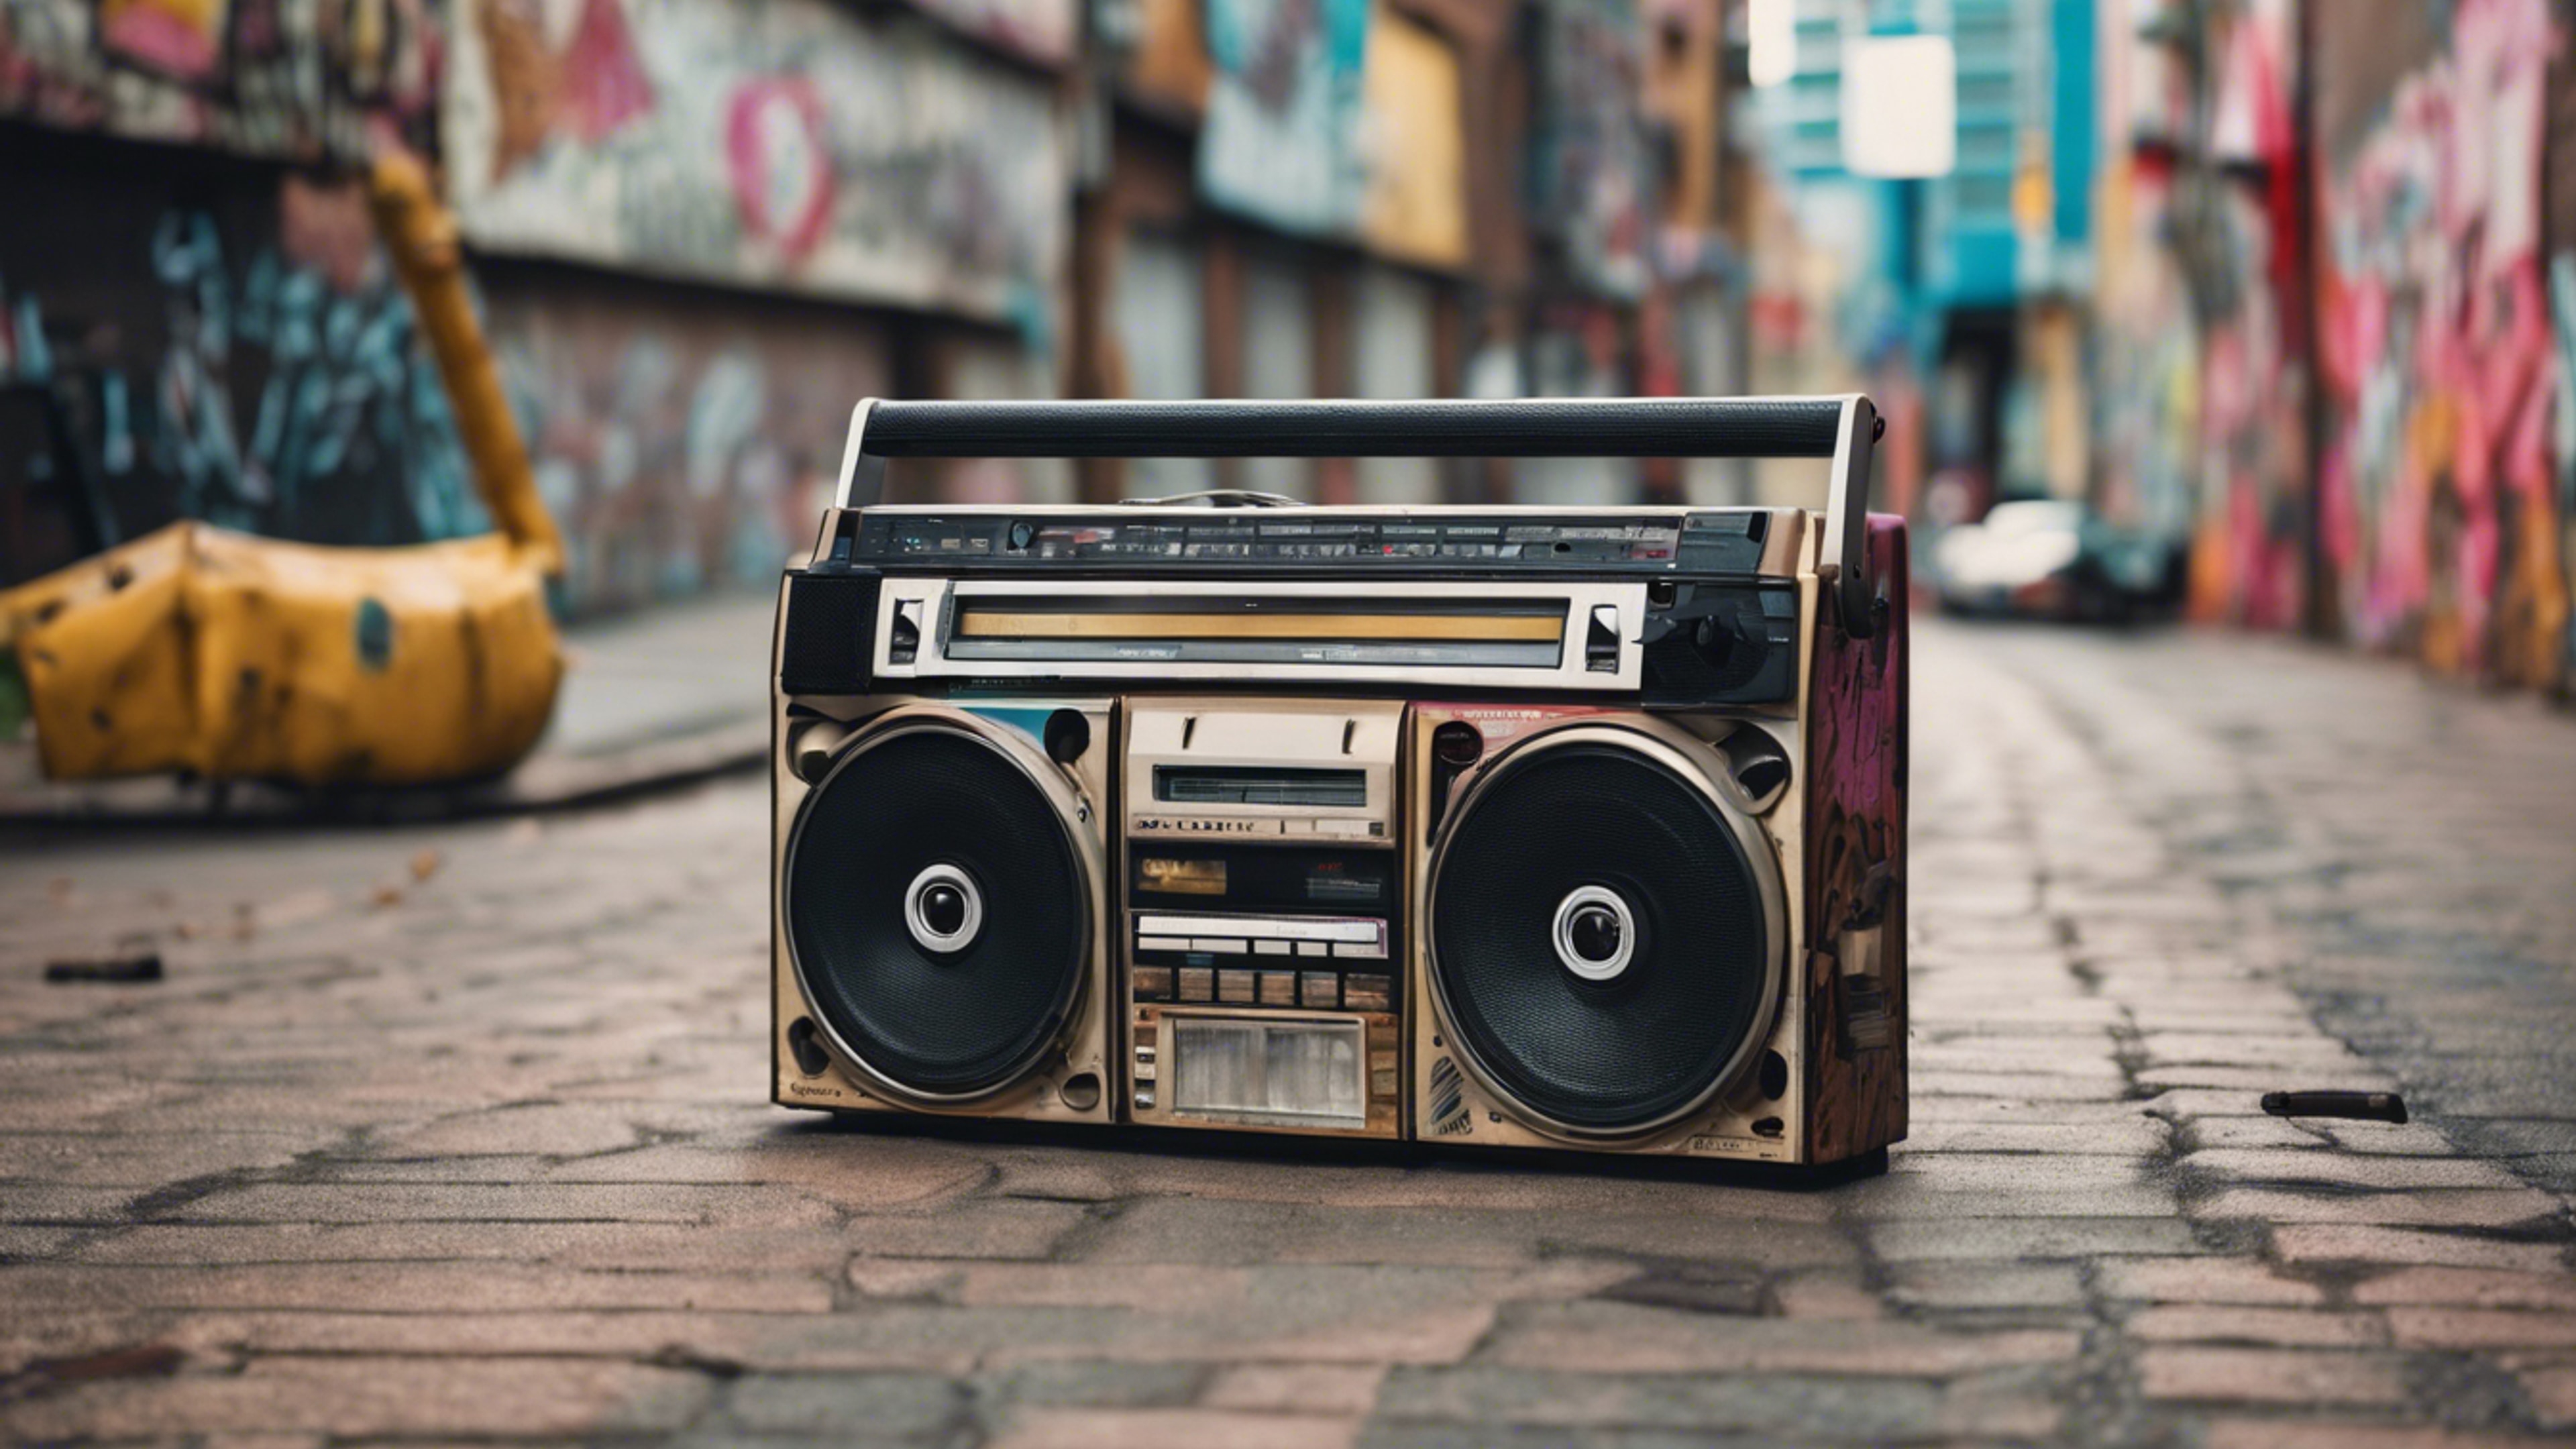 An old school 80s boombox playing cassette tapes on a graffitied street. Tapeta[63e13512f9e44708b5c0]